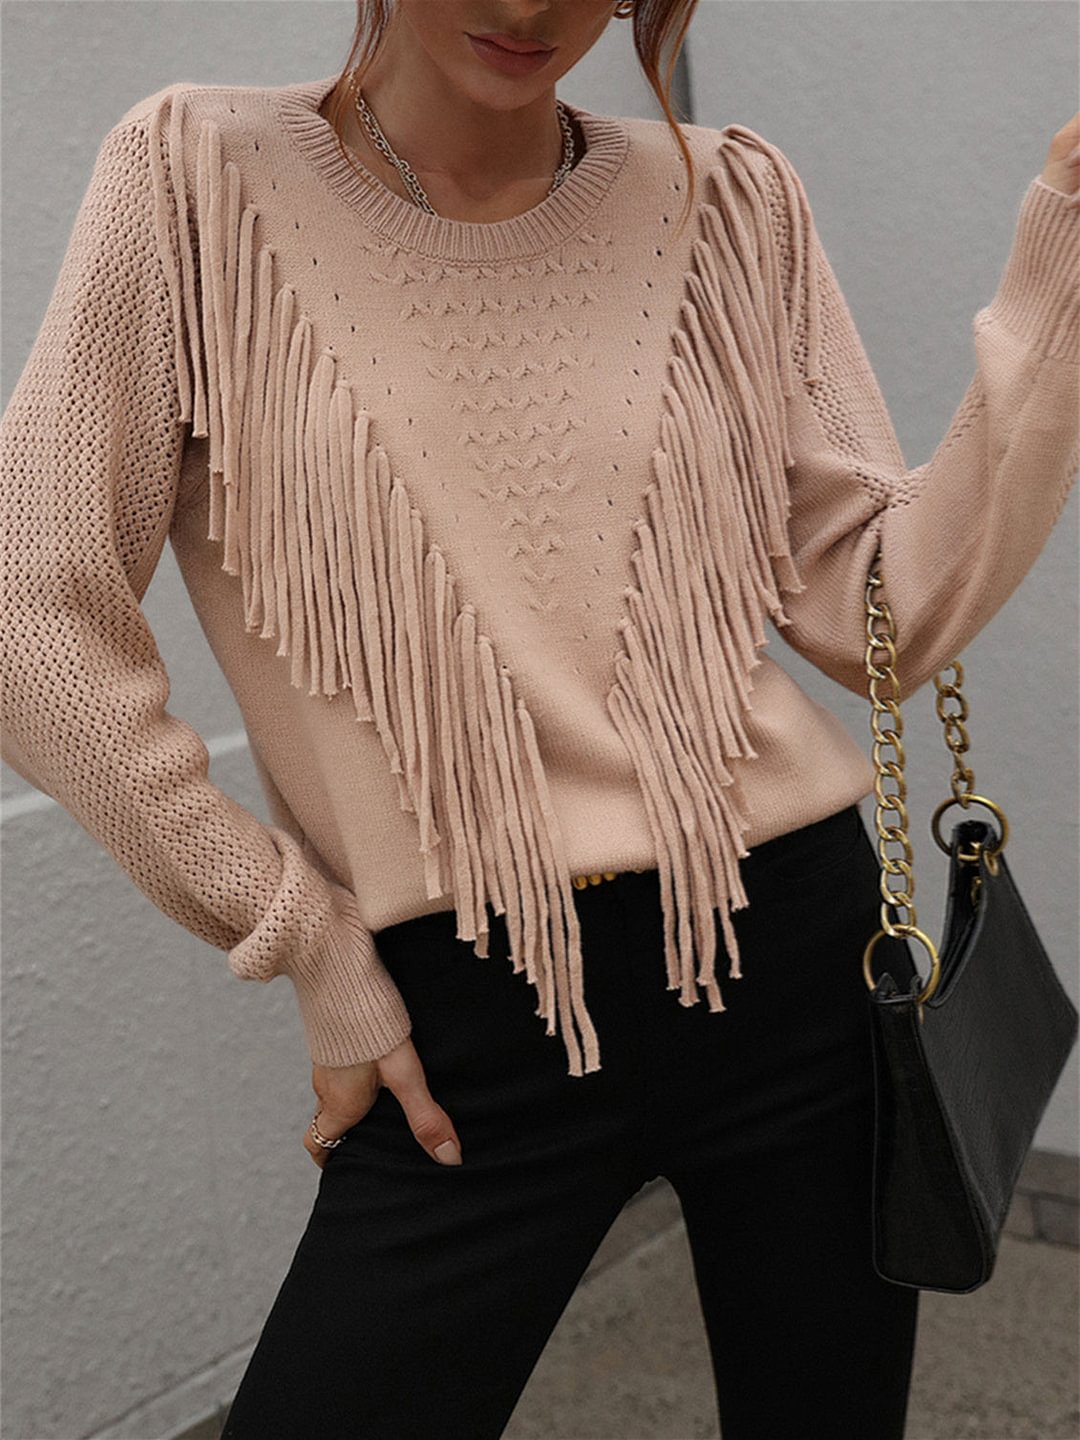 Women's Long Sleeve Scoop Neck Stitching Top Knit Sweater